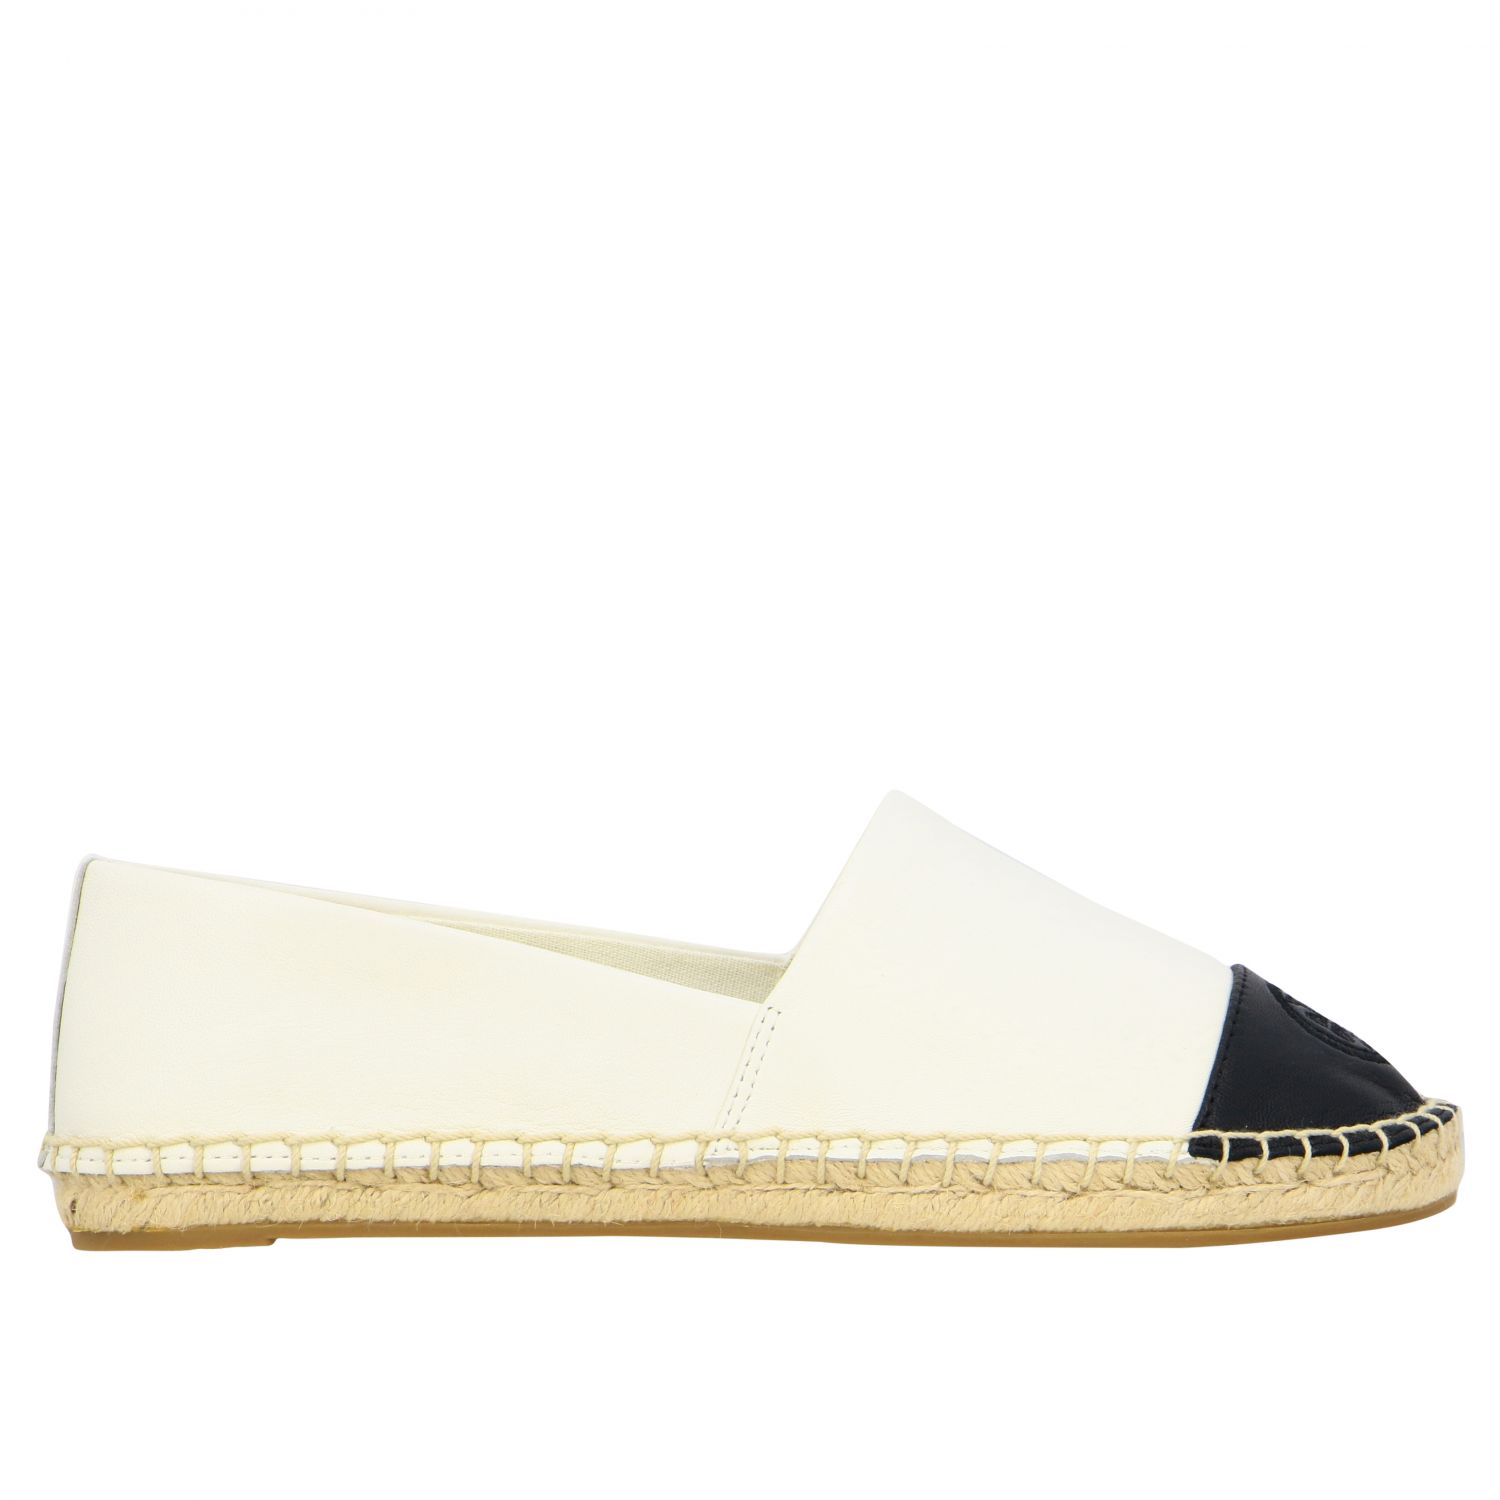 tory burch white leather espadrilles